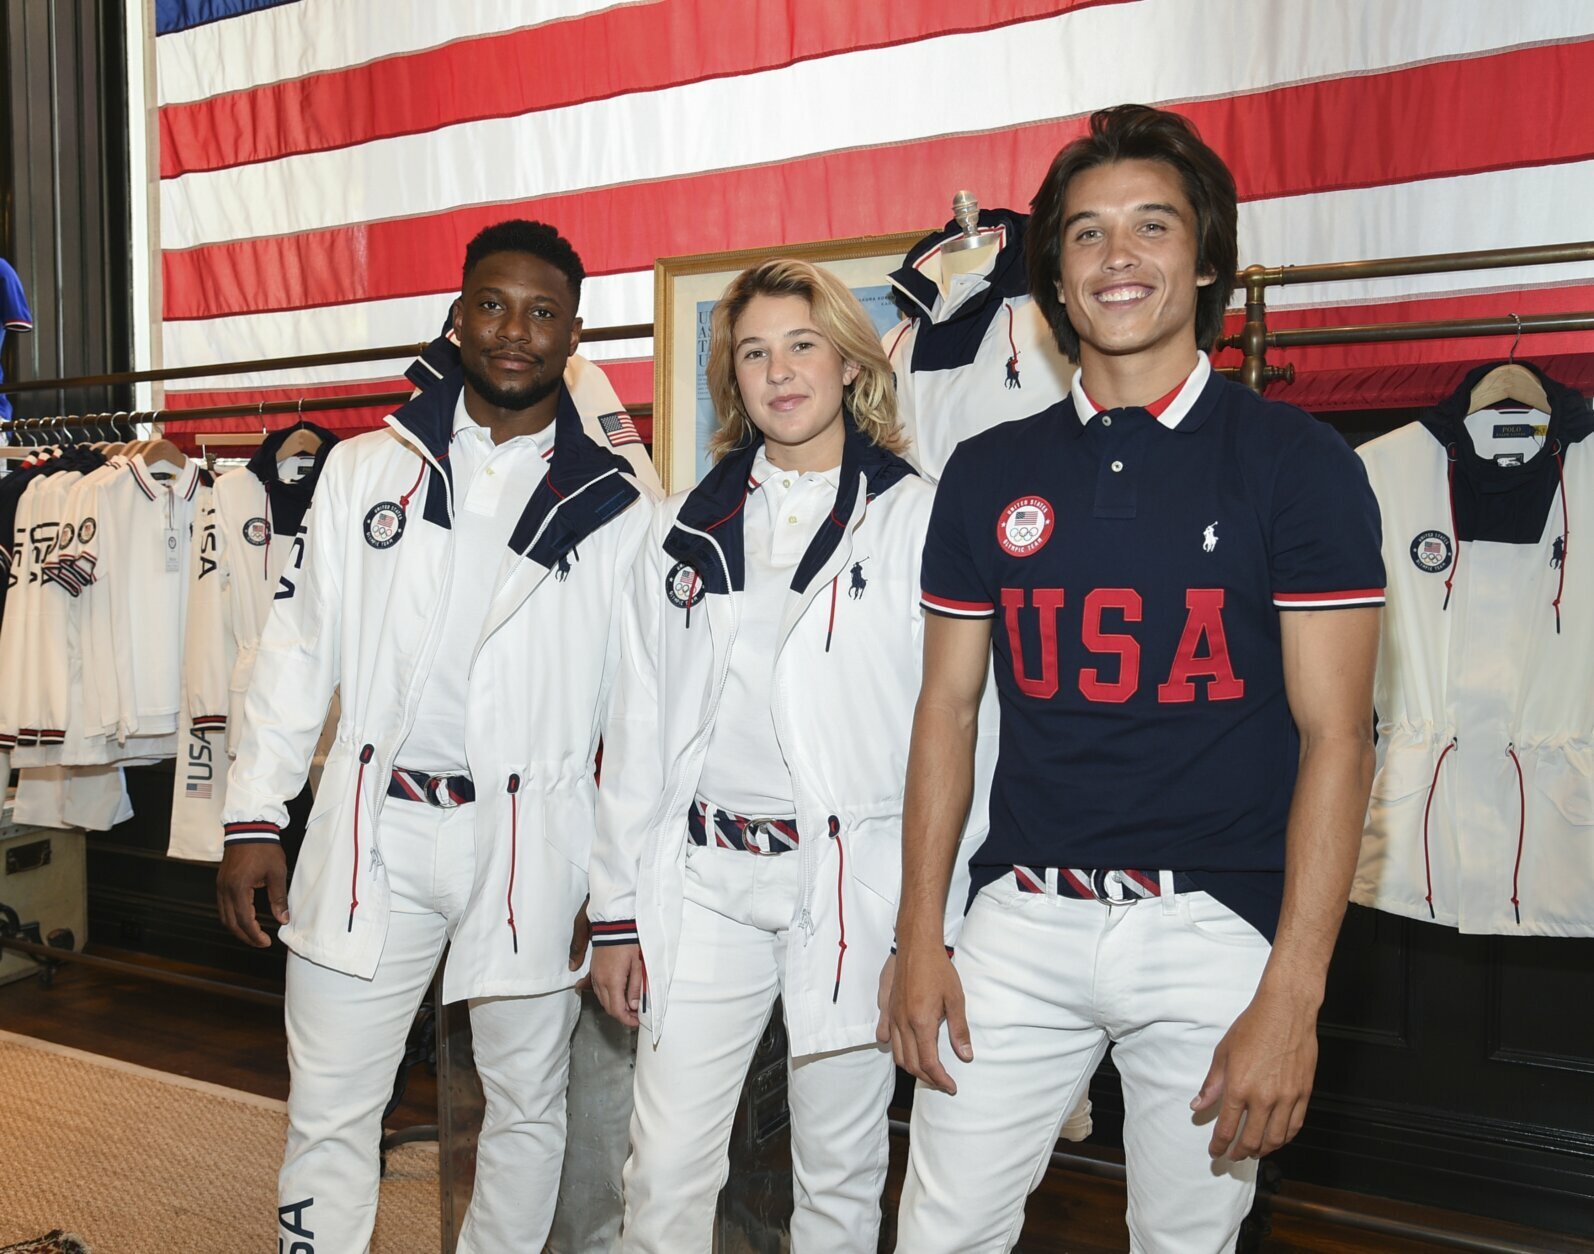 Ralph Lauren unveils Polo shirts made from recycled plastic bottles